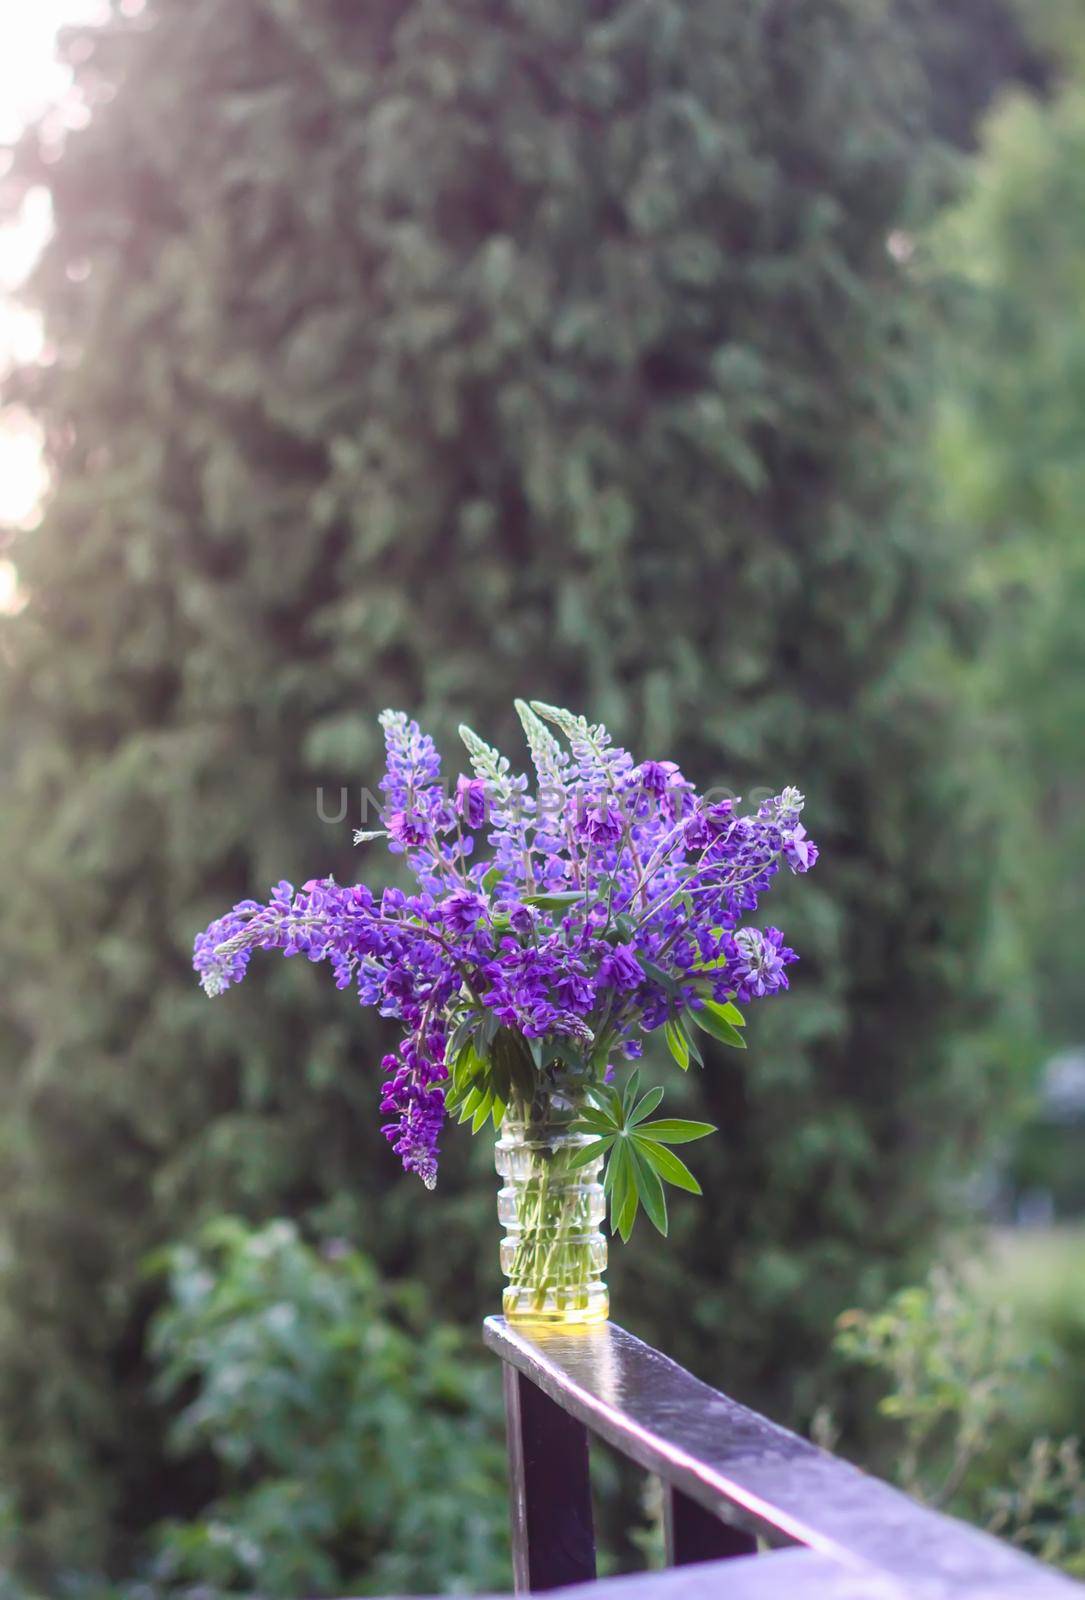 Bouquet of summer flowers in glass vase outdoors. Large-leaved or Bigleaf Lupine flowers. Lupinus polyphyllus plants. by nightlyviolet